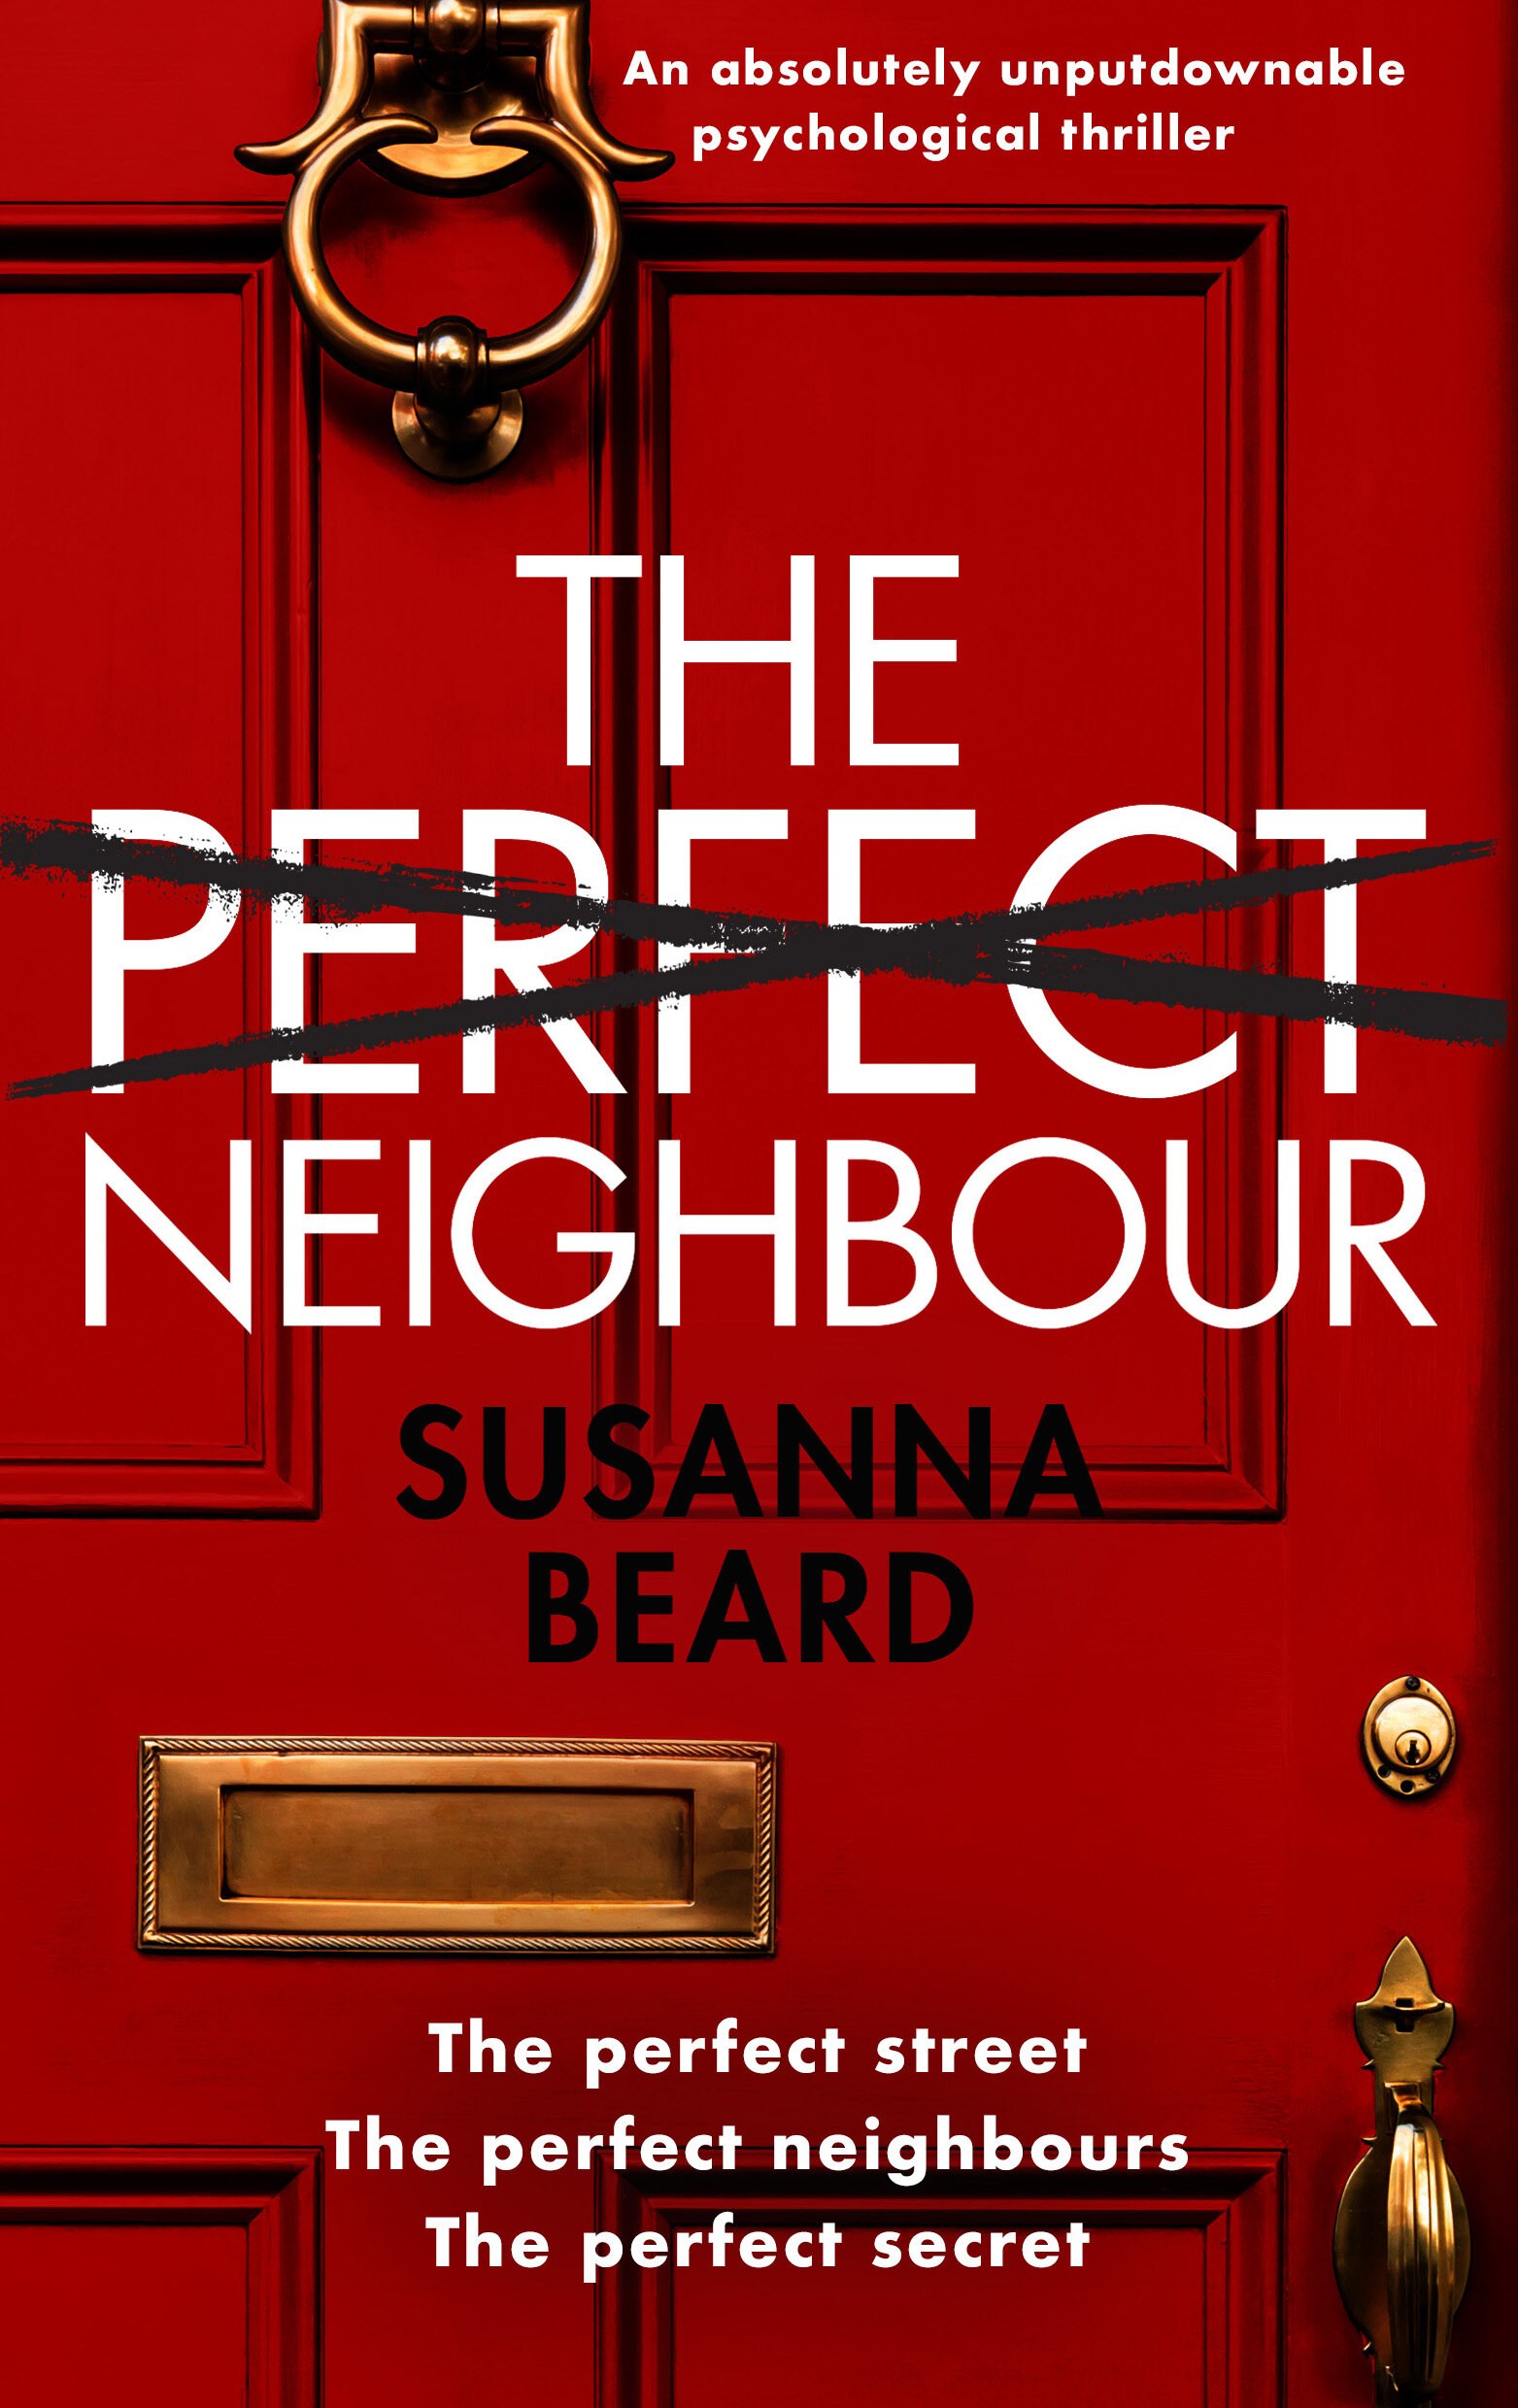 THE PERFECT NEIGHBOUR cover.jpeg